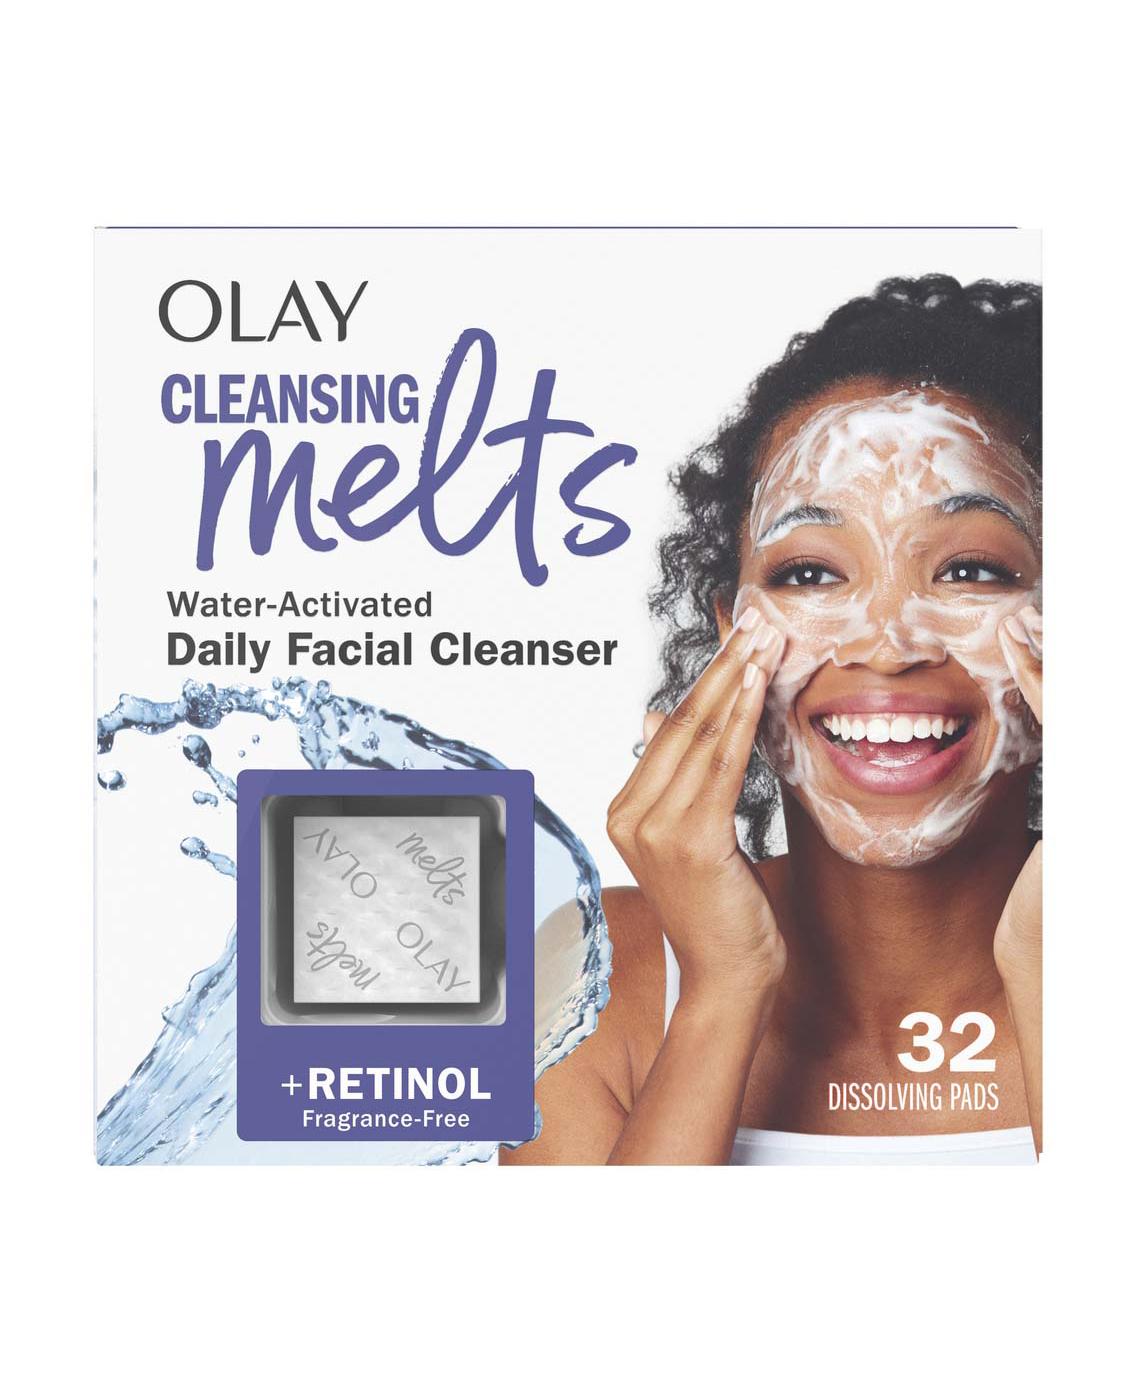 Olay Cleansing Melts Water-Activated Daily Facial Cleanser + Retinol; image 1 of 3